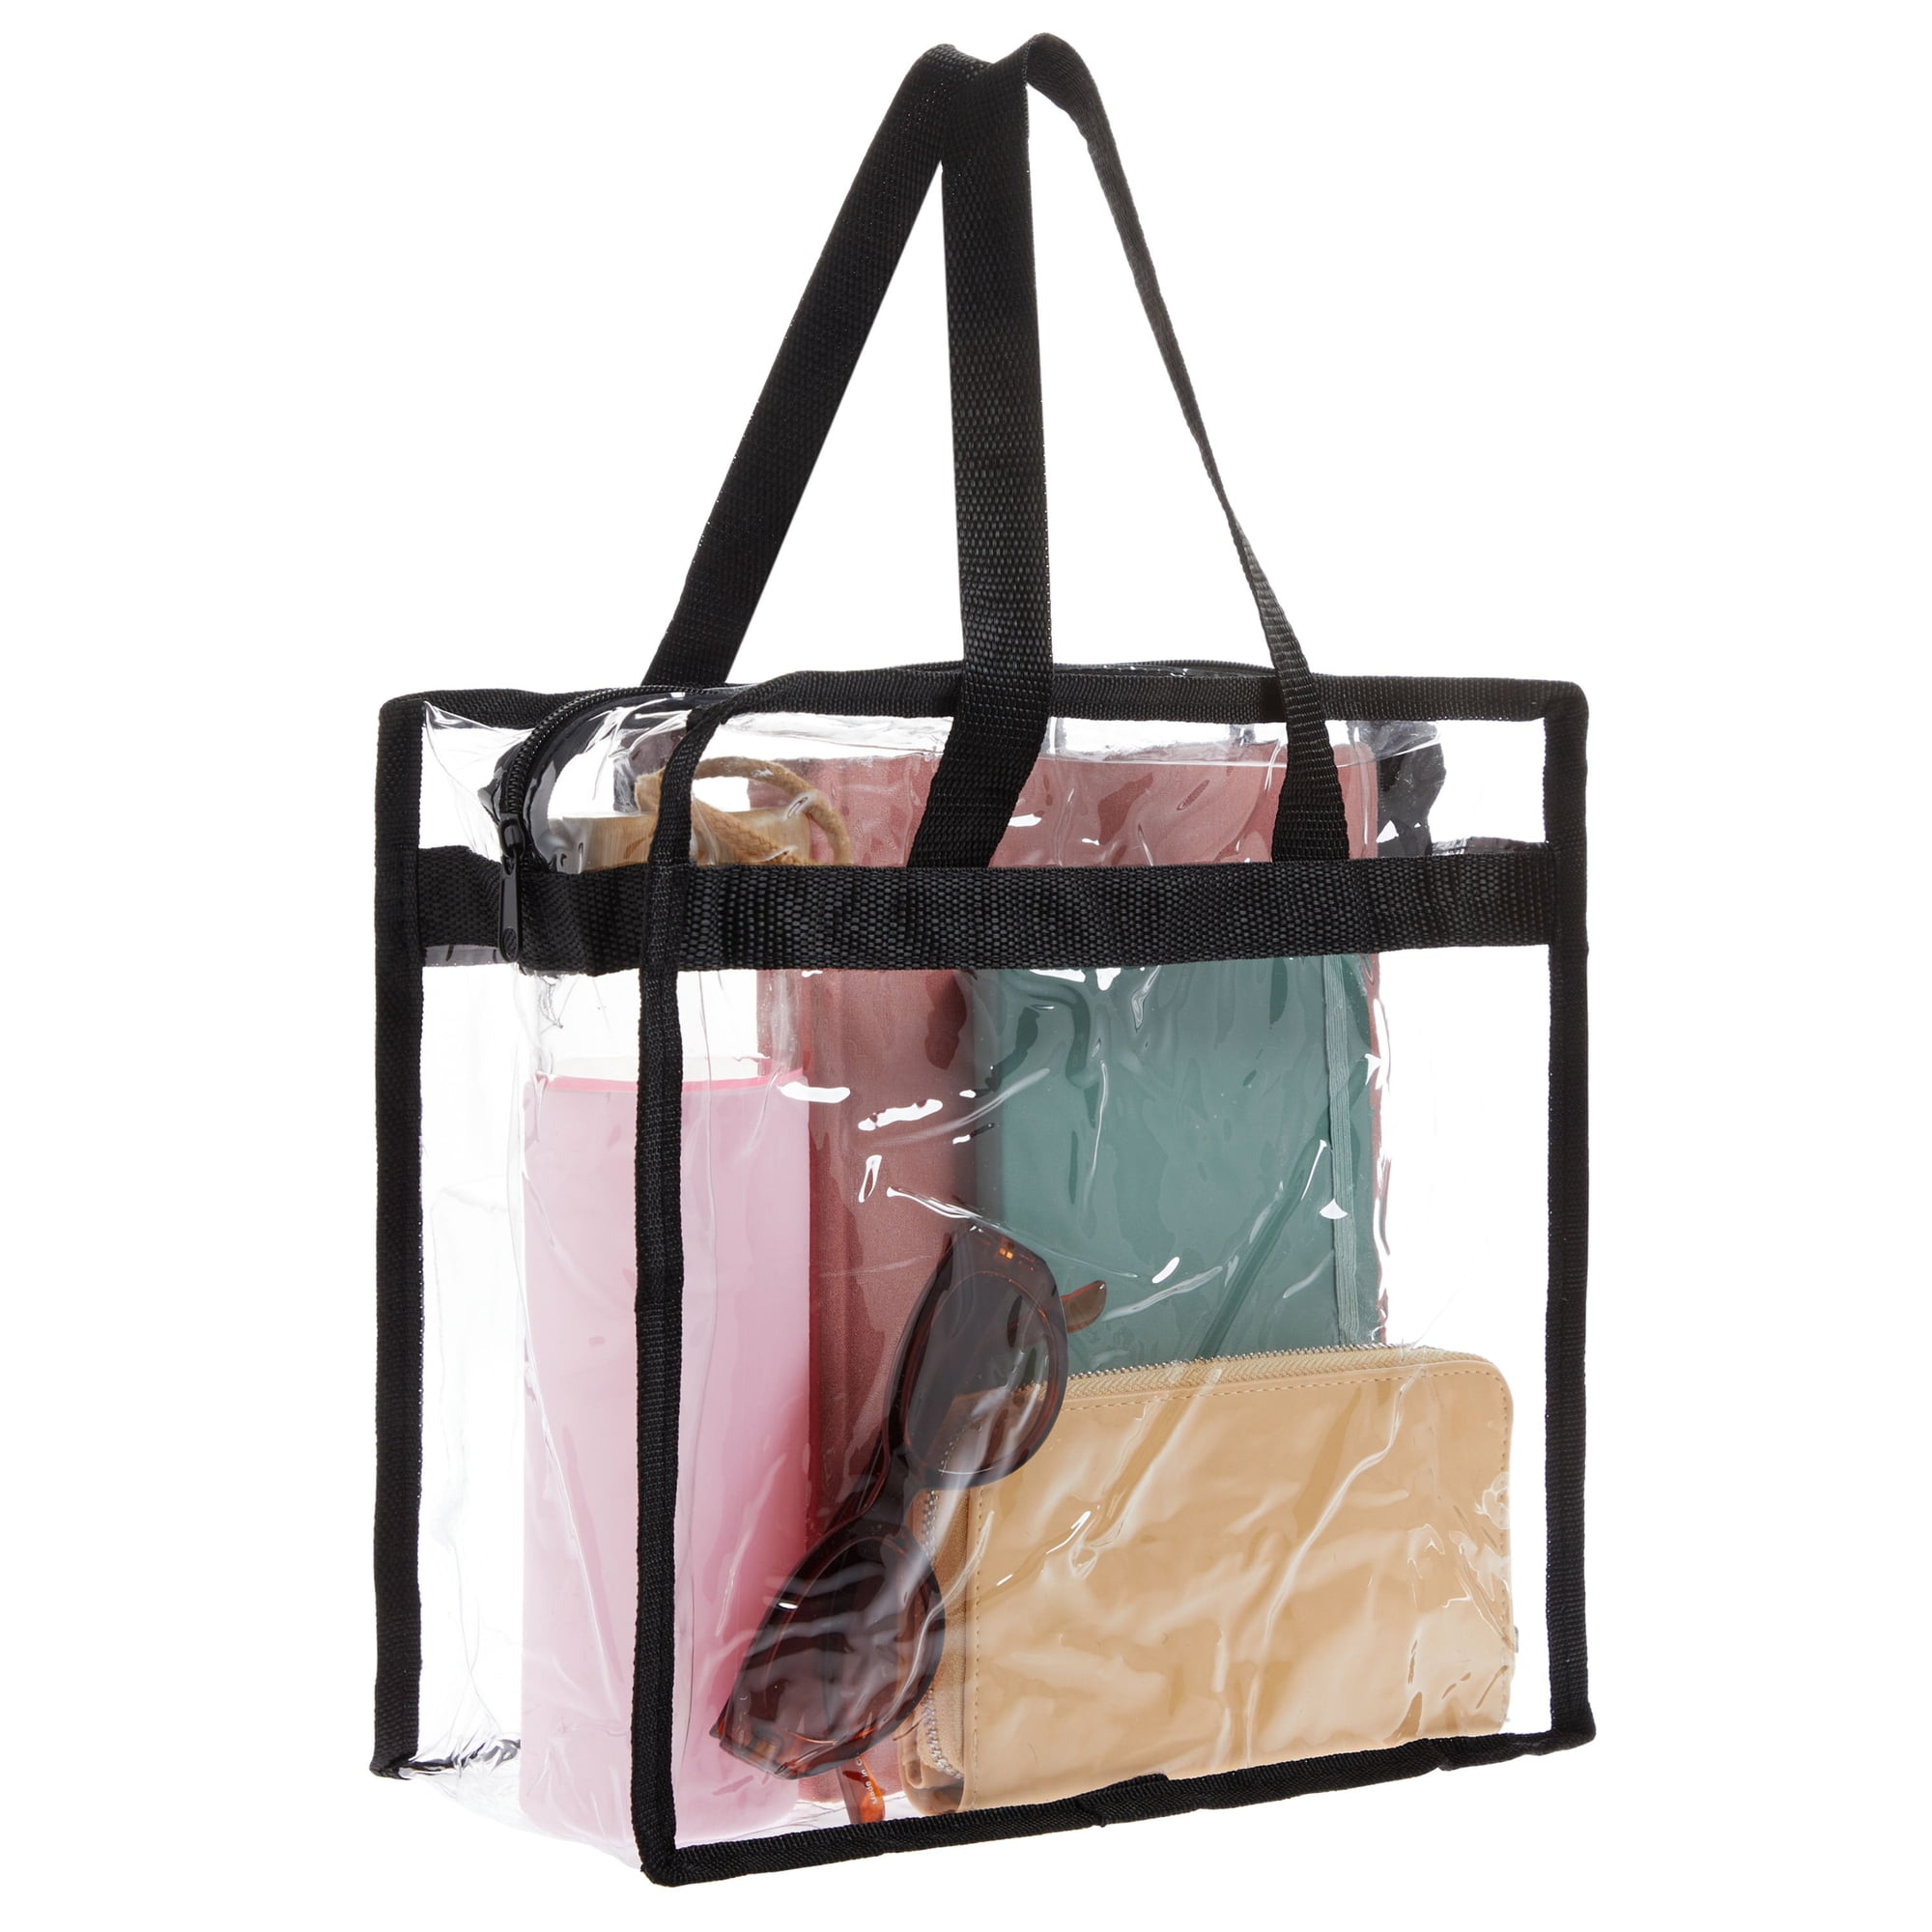 Clear Bag Stadium Approved, Security Approved Clear Tote Bag,12 x 12 x 6